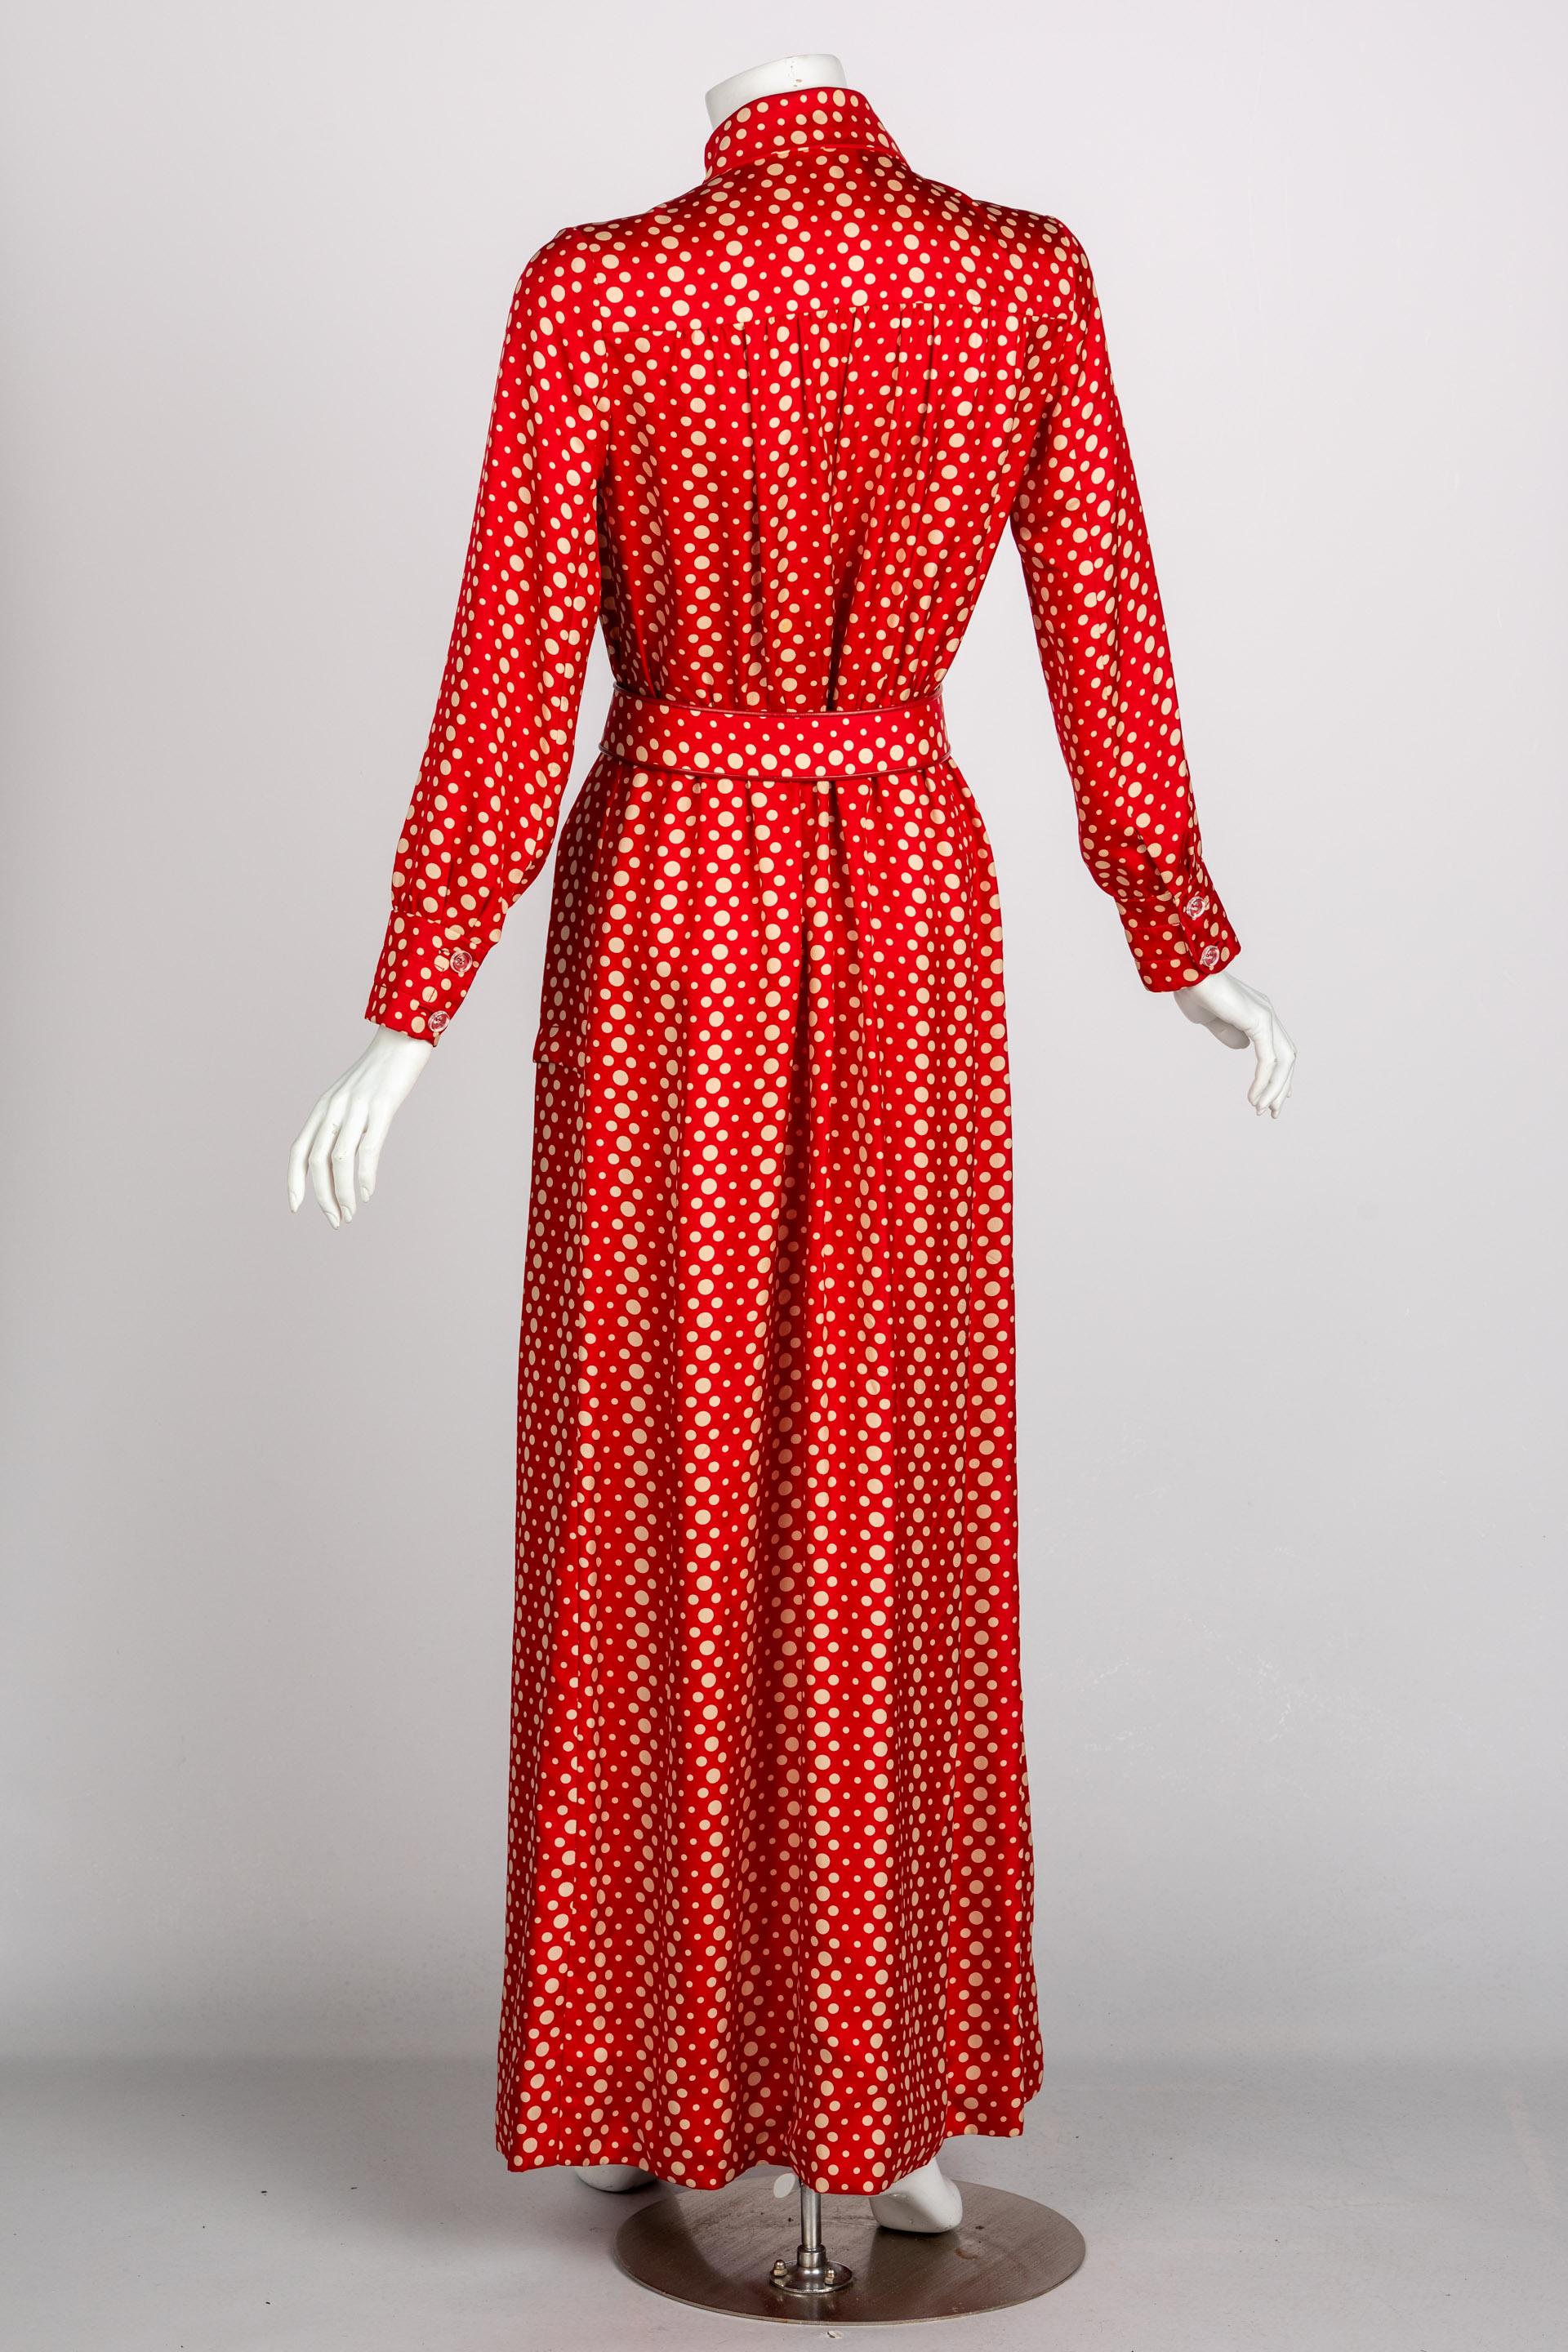 Galanos Red Polka Dot Lucite Belted Silk Maxi Dress, 1970s For Sale 2